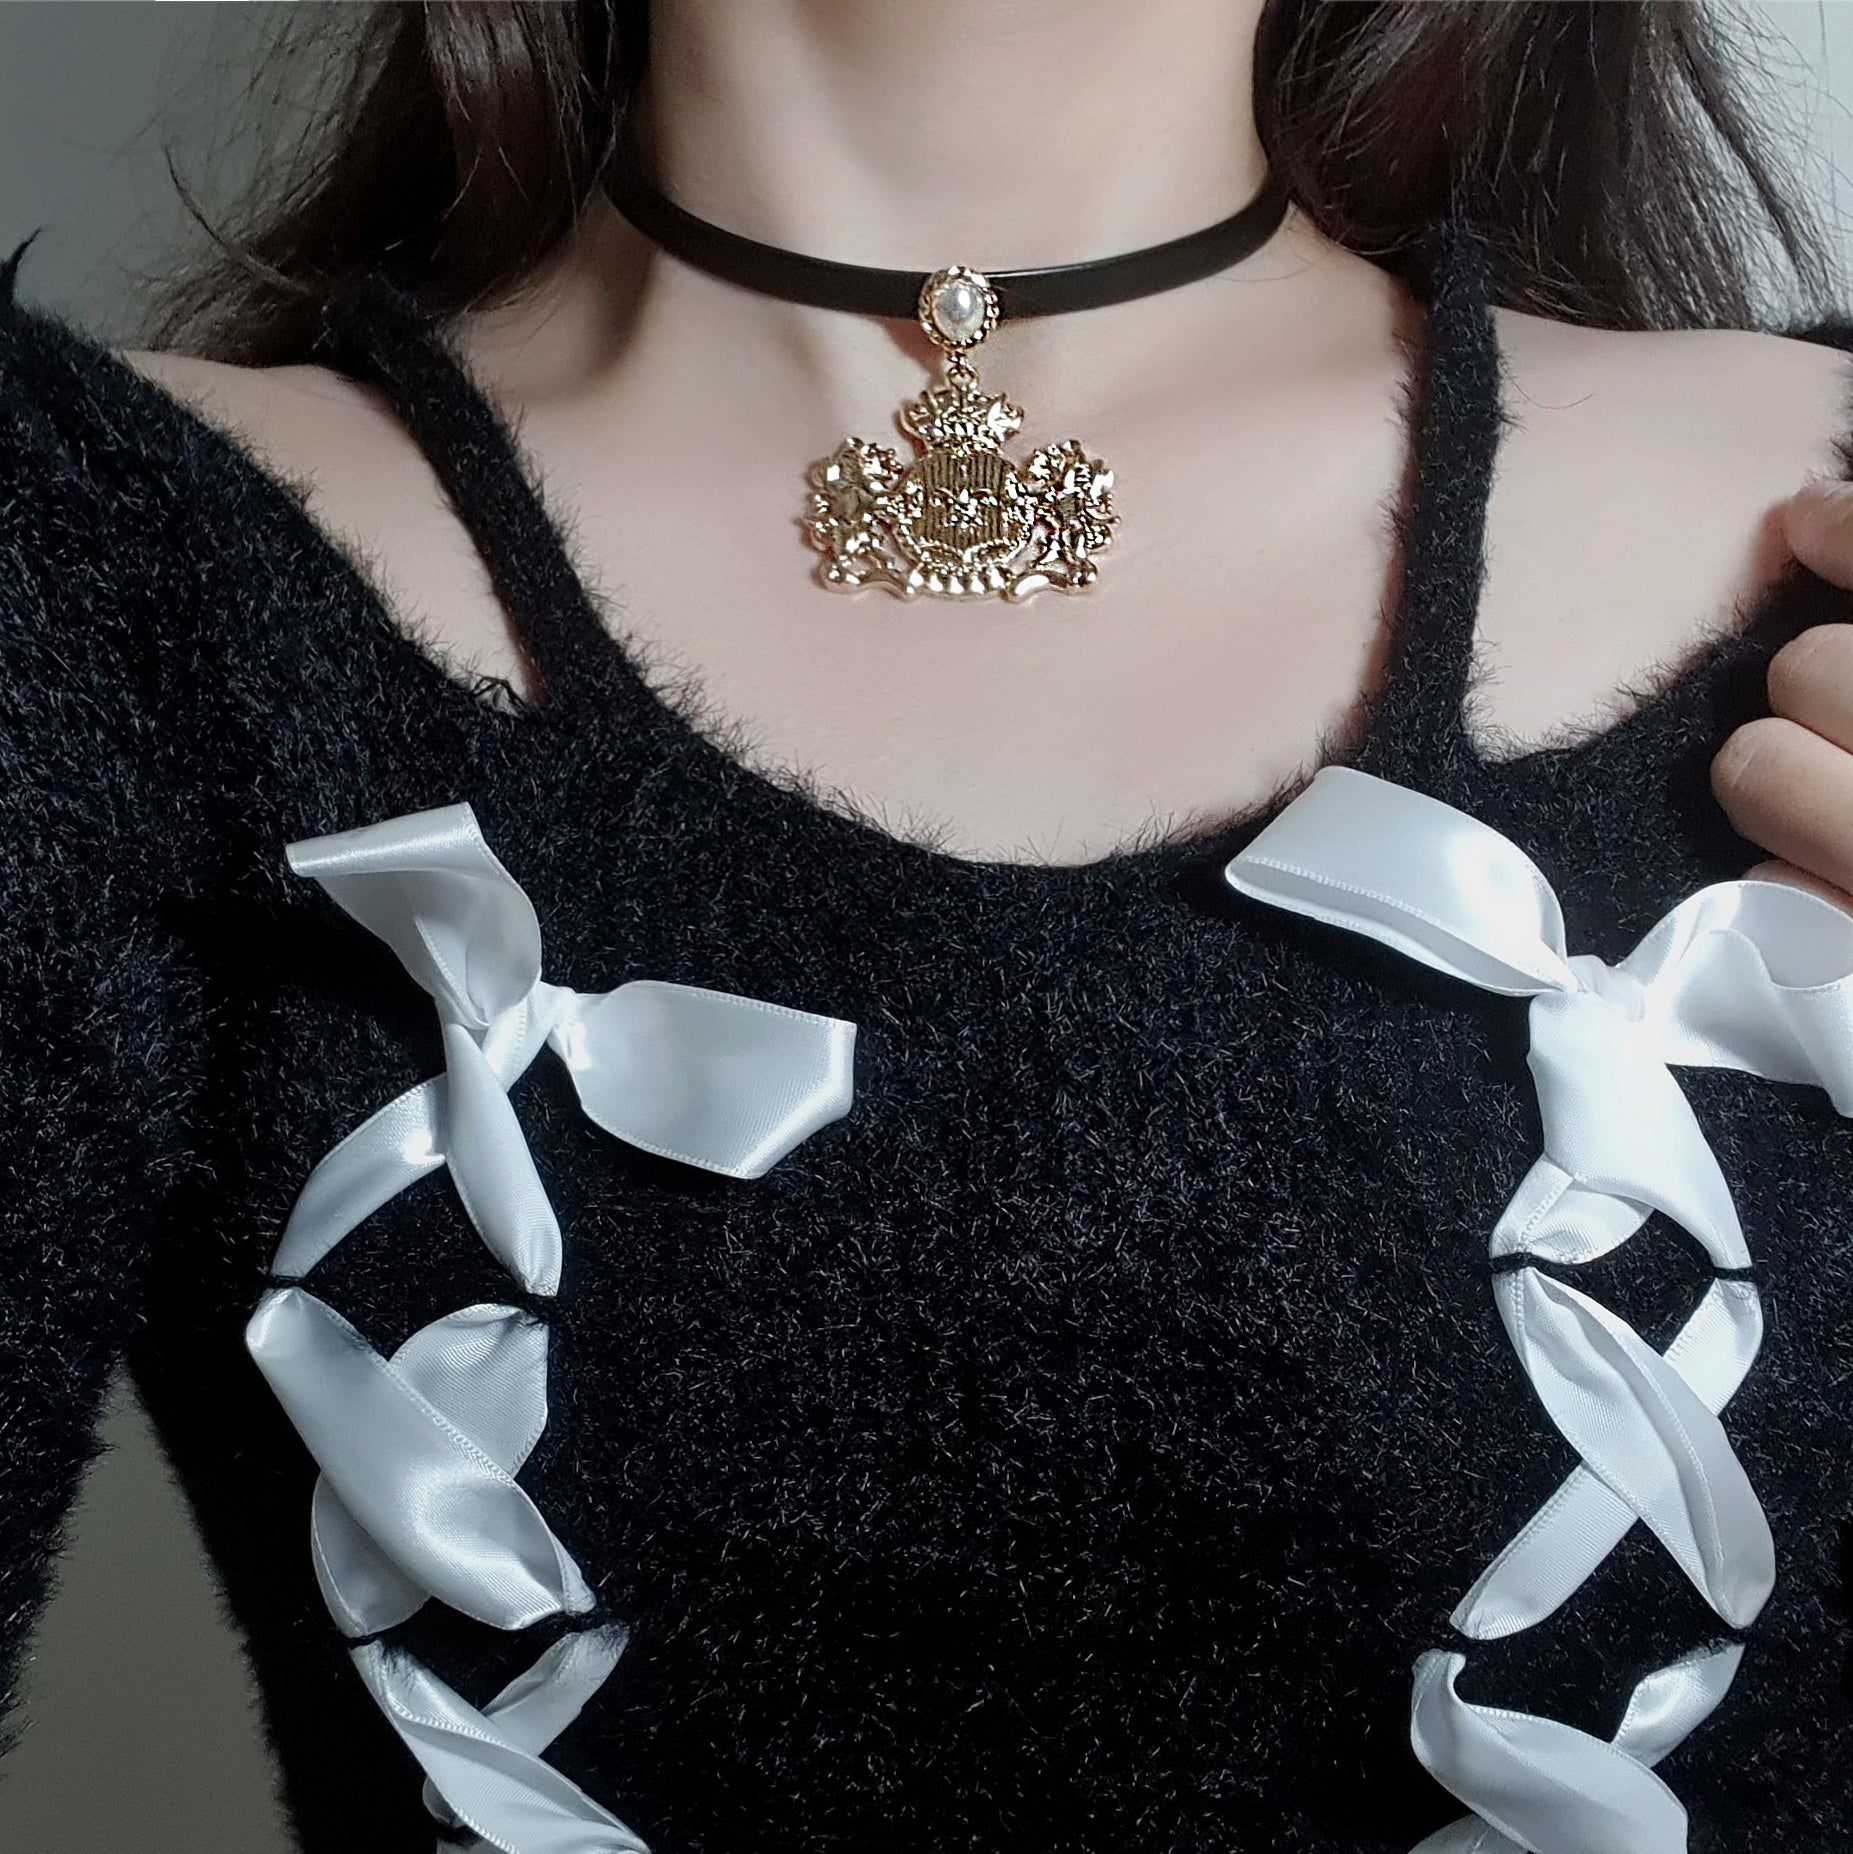 Black Leather Choker Necklace for Women Choker With Golden Buckle Choker  Sexy Choker Punk Gift for Girlfriend Made in Ukraine - Etsy